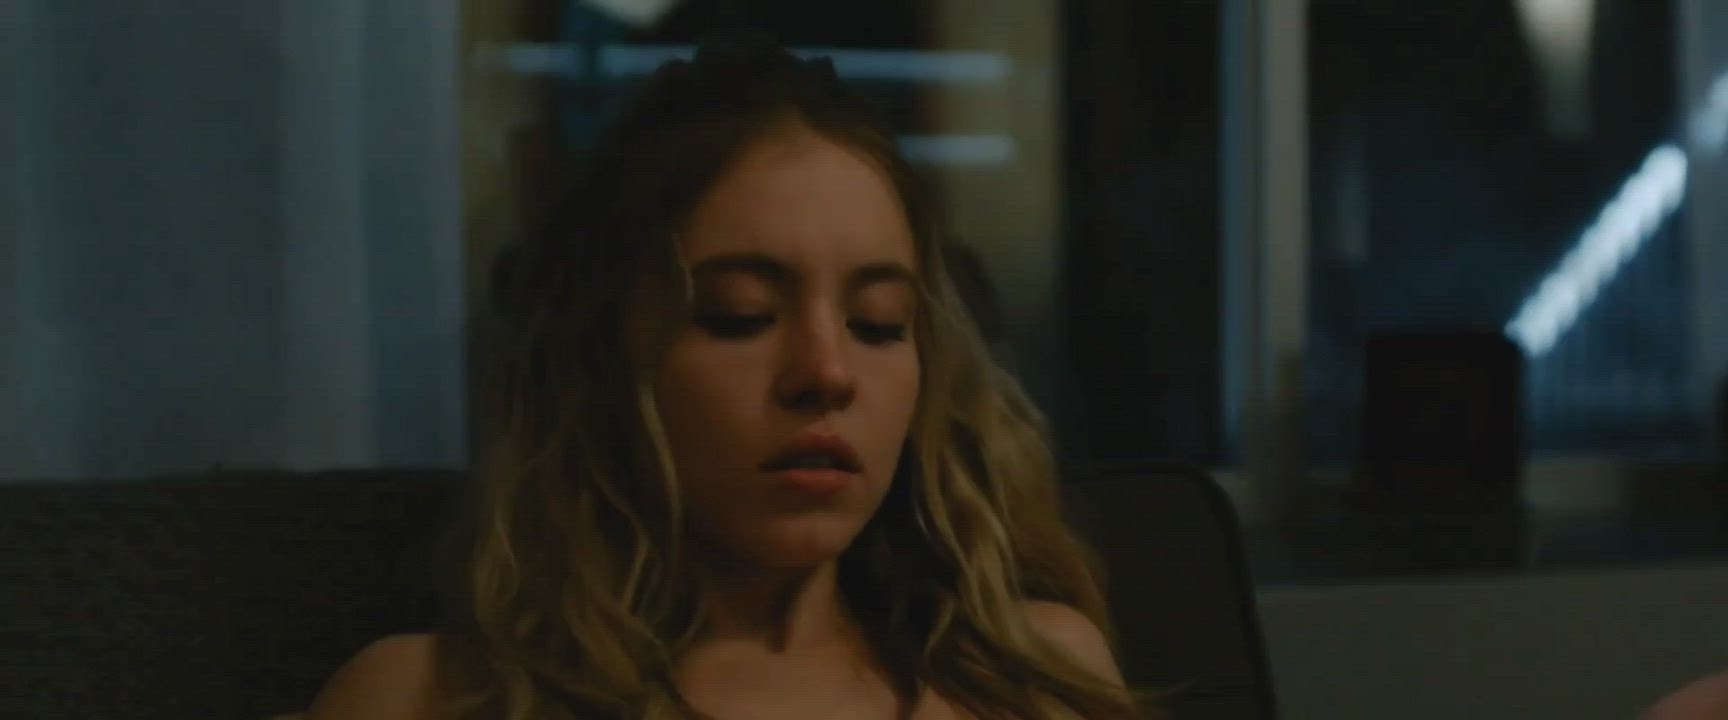 Sydney sweeney getting groped and pussy licked : video clip